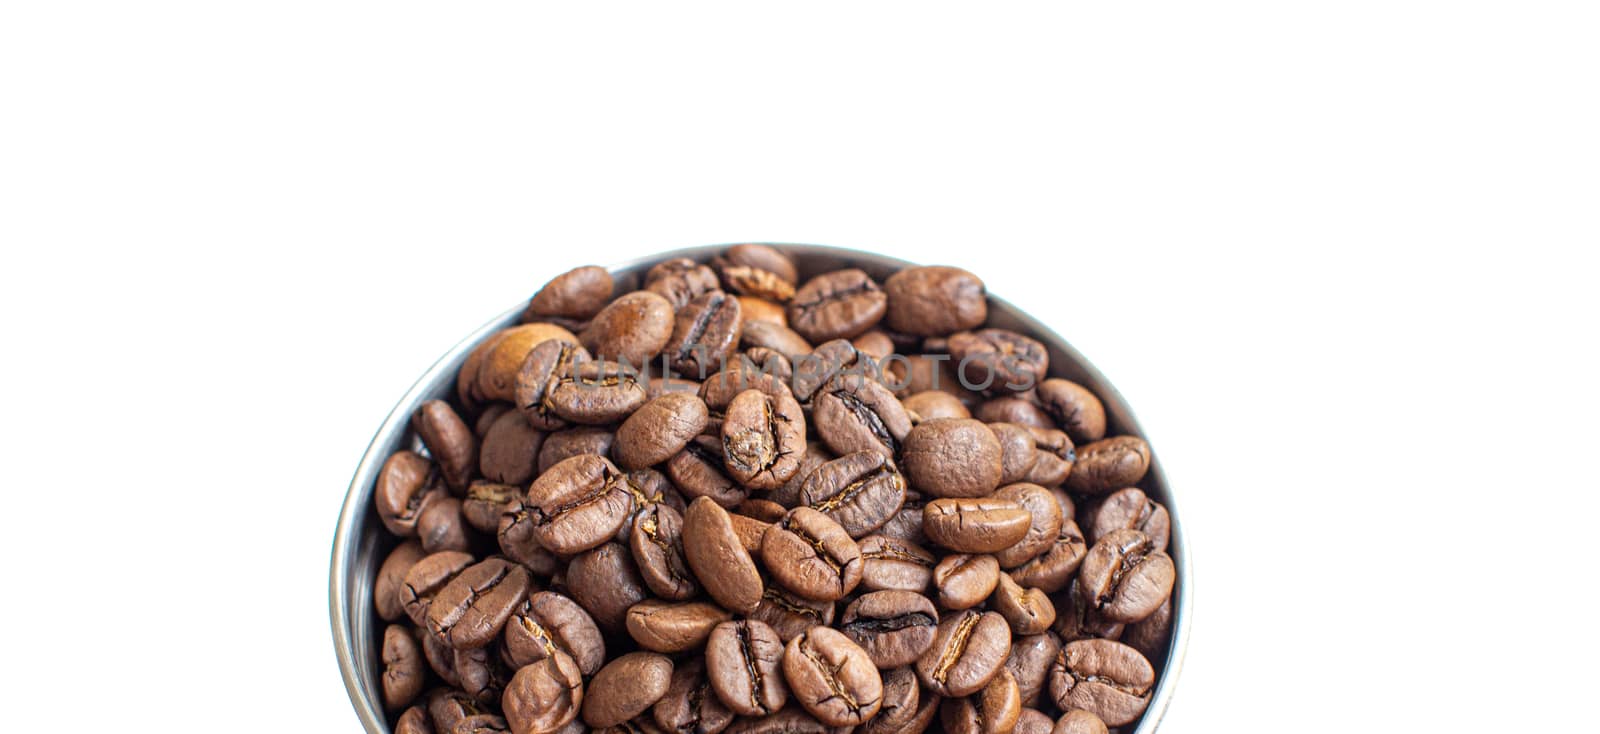 A lot of coffee beans in a metal coffee grinder on a white background by AnatoliiFoto